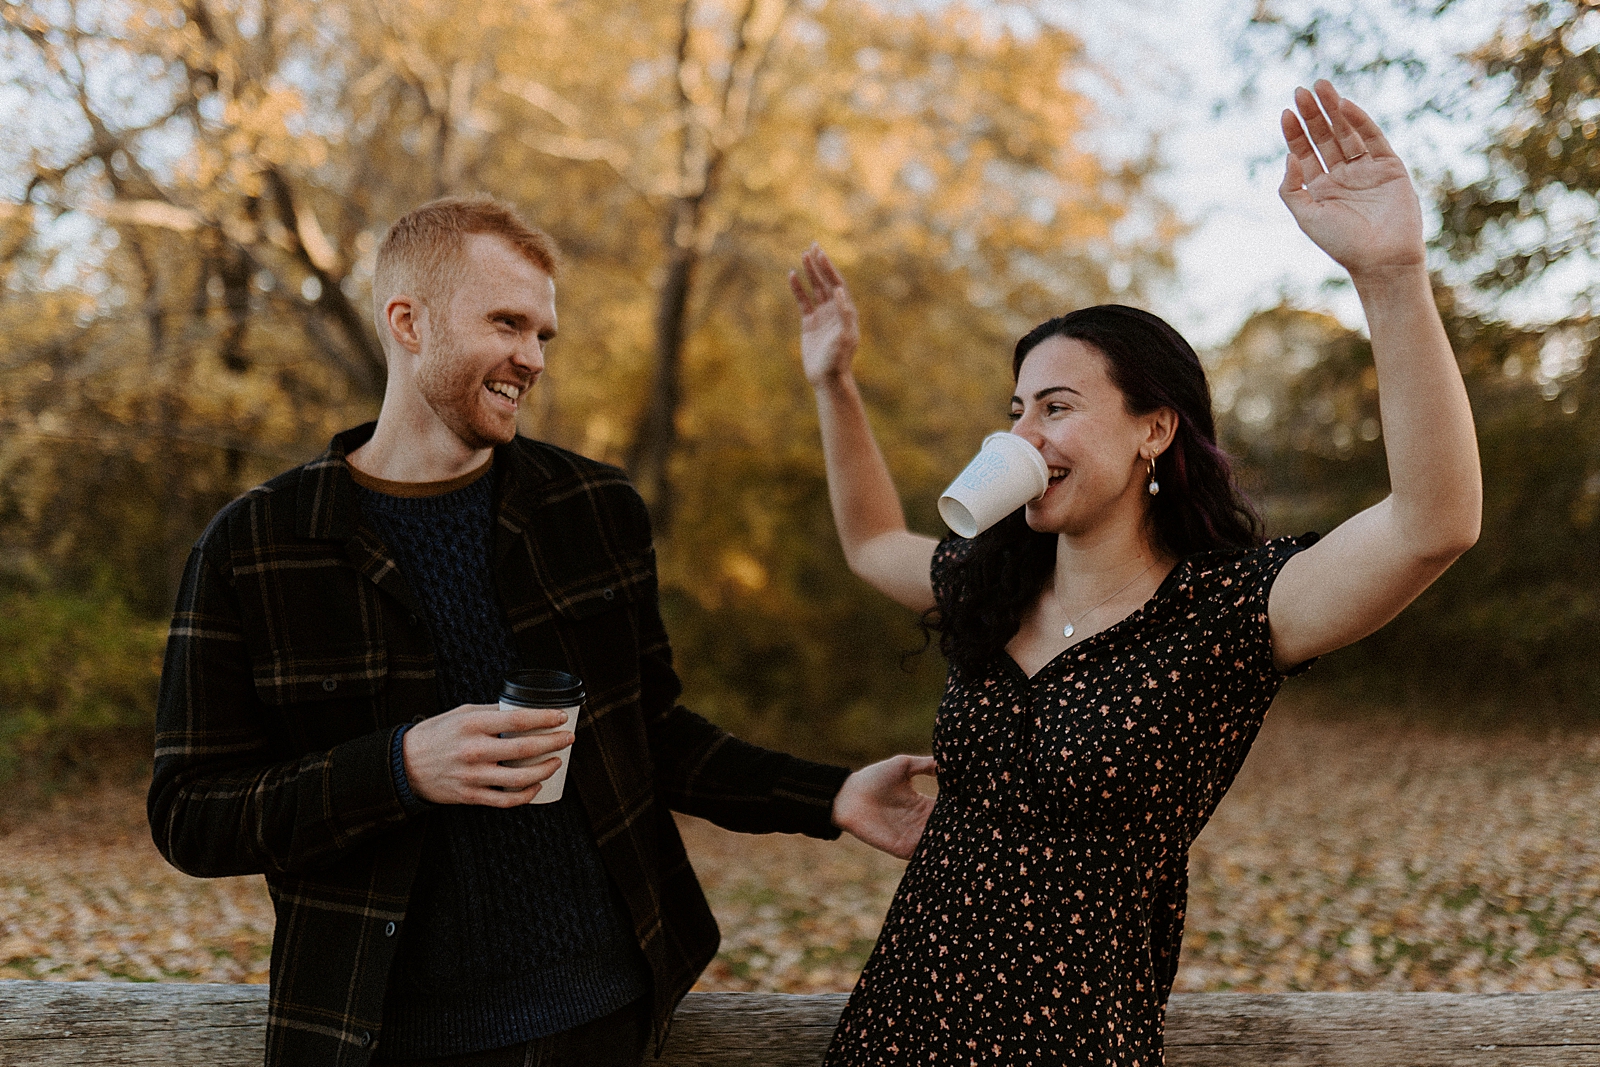 Couple in goofy poses with woman holding coffee cup by mouth outside